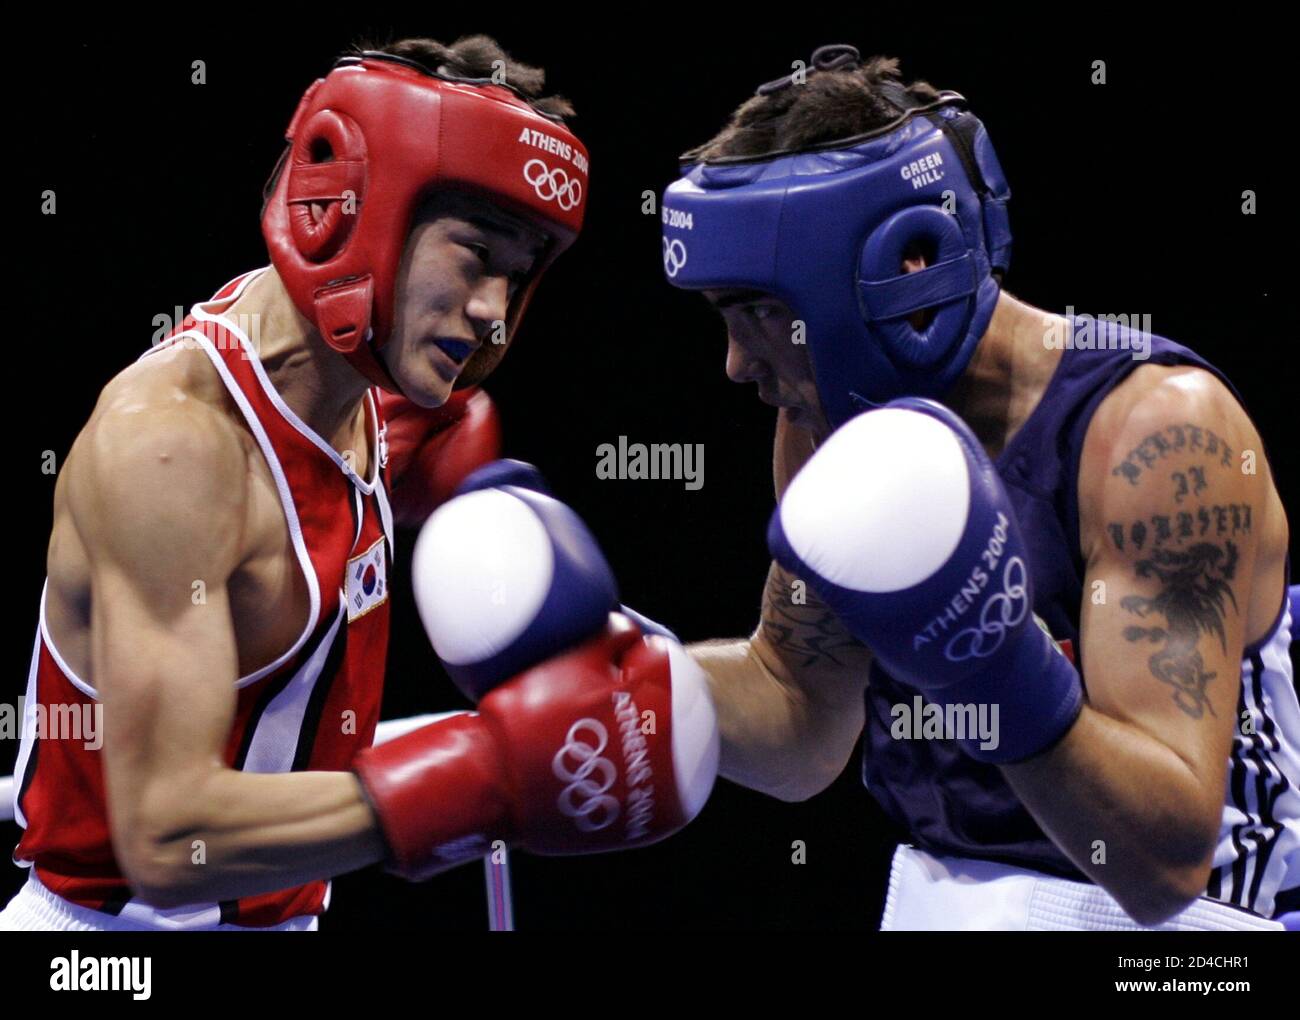 South Korea's Seok Hwan Jo (L) fights Canada's Benoit Gaudet (R) in their featherweight (57kg) round of 16 boxing bout at the Athens 2004 Olympic Summer Games August 20, 2004. Seok Hwan won the bout. Stock Photo